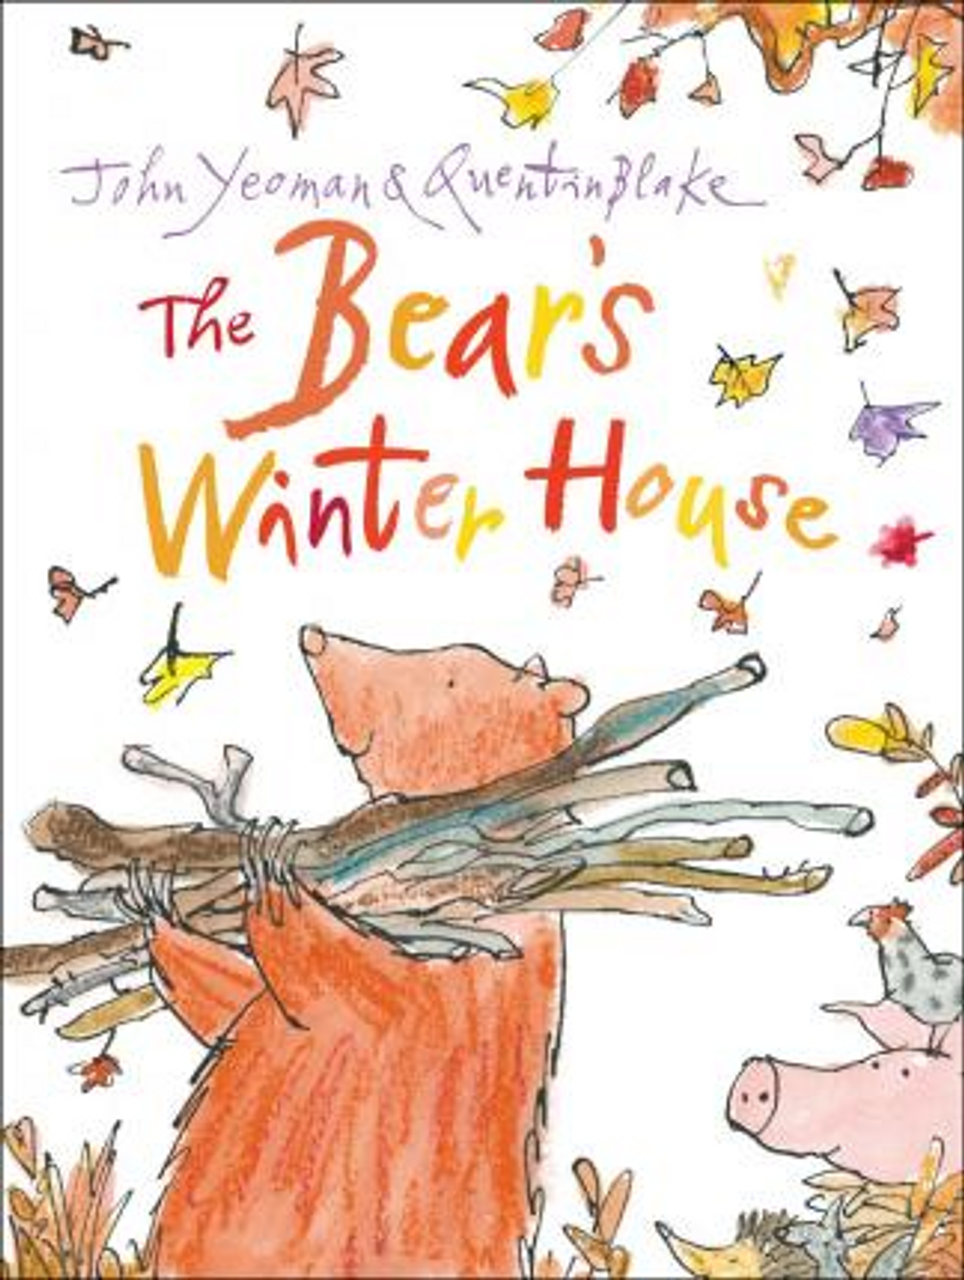 John Yeoman / The Bear's Winter House (Children's Picture Book)